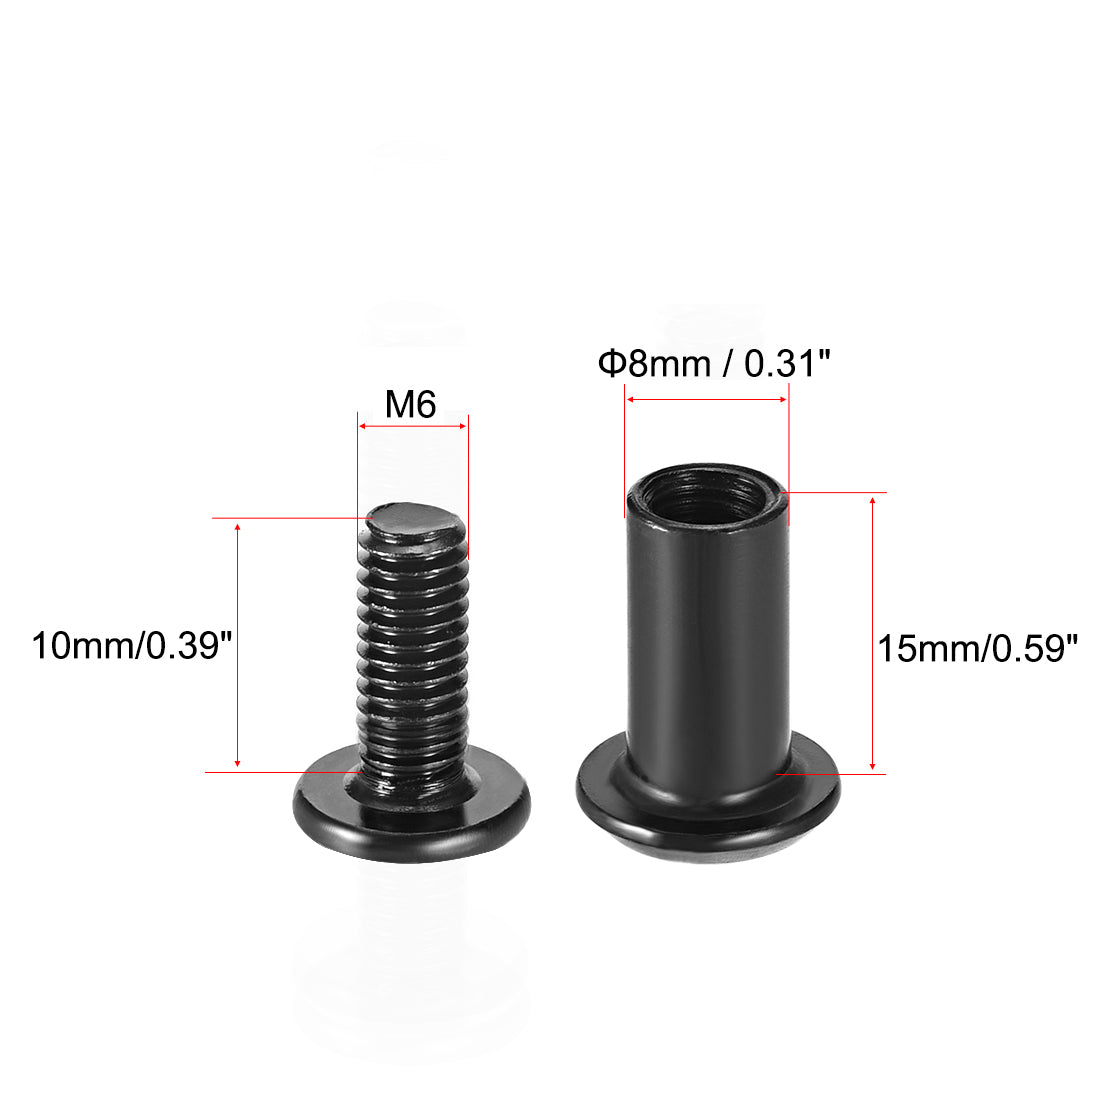 uxcell Uxcell Screw Post Male M6x10mm Belt Buckle Binding Bolts Carbon Steel Black 10 Sets